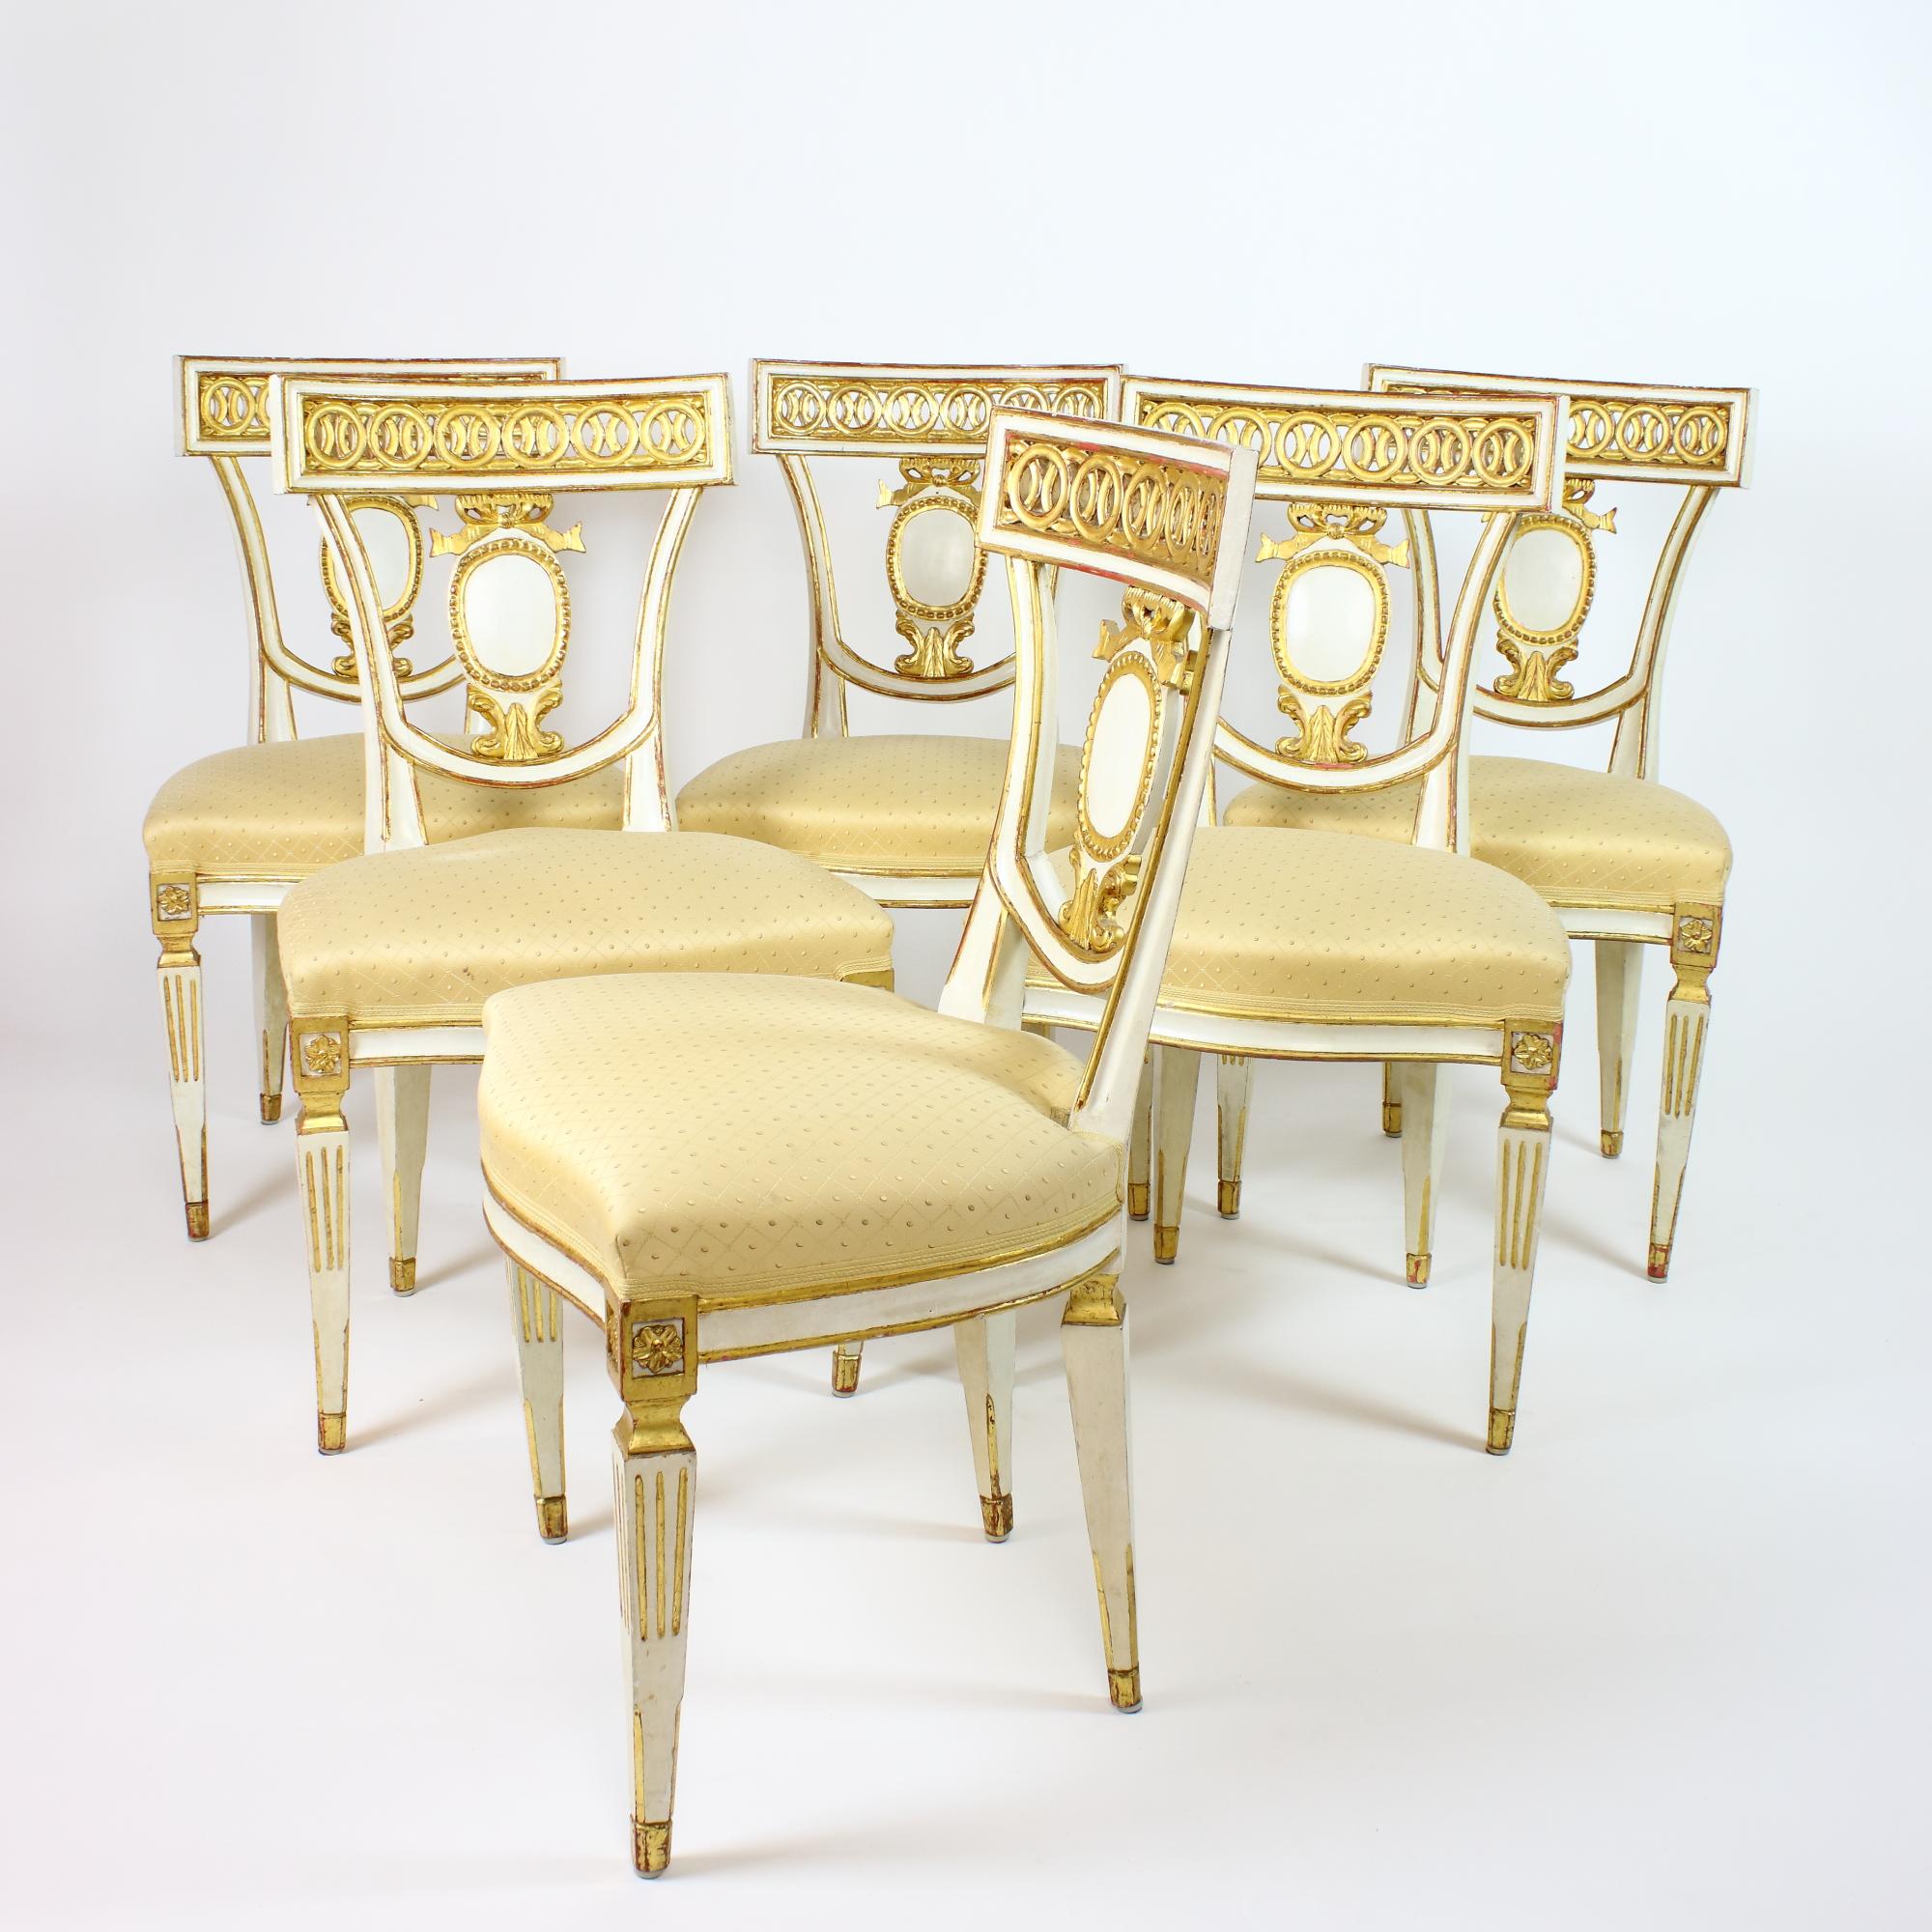 Very elegant late 19th century set of six Italian Neoclassical Klismos shaped Empire side or dining chairs: 
standing on four tapering and partially fluted legs topped by paterae cartouches a semi-eliptical seat with slightly curved front. The back